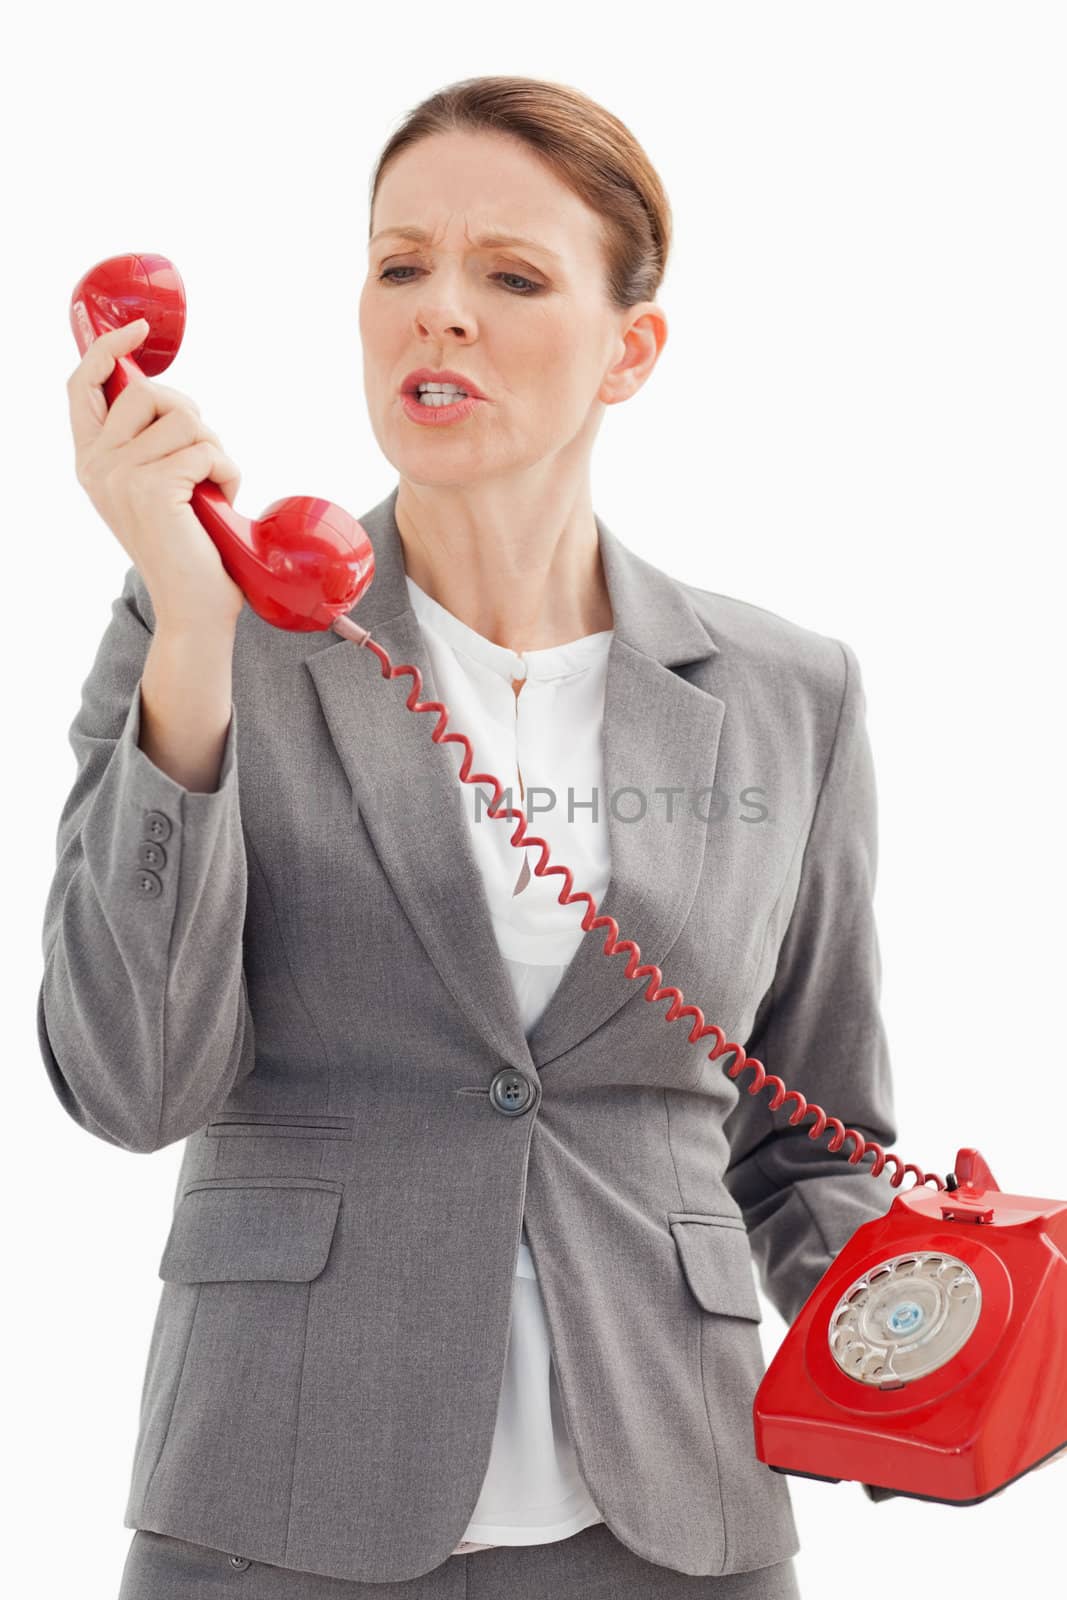 An angry businesswoman is shouting at the phone